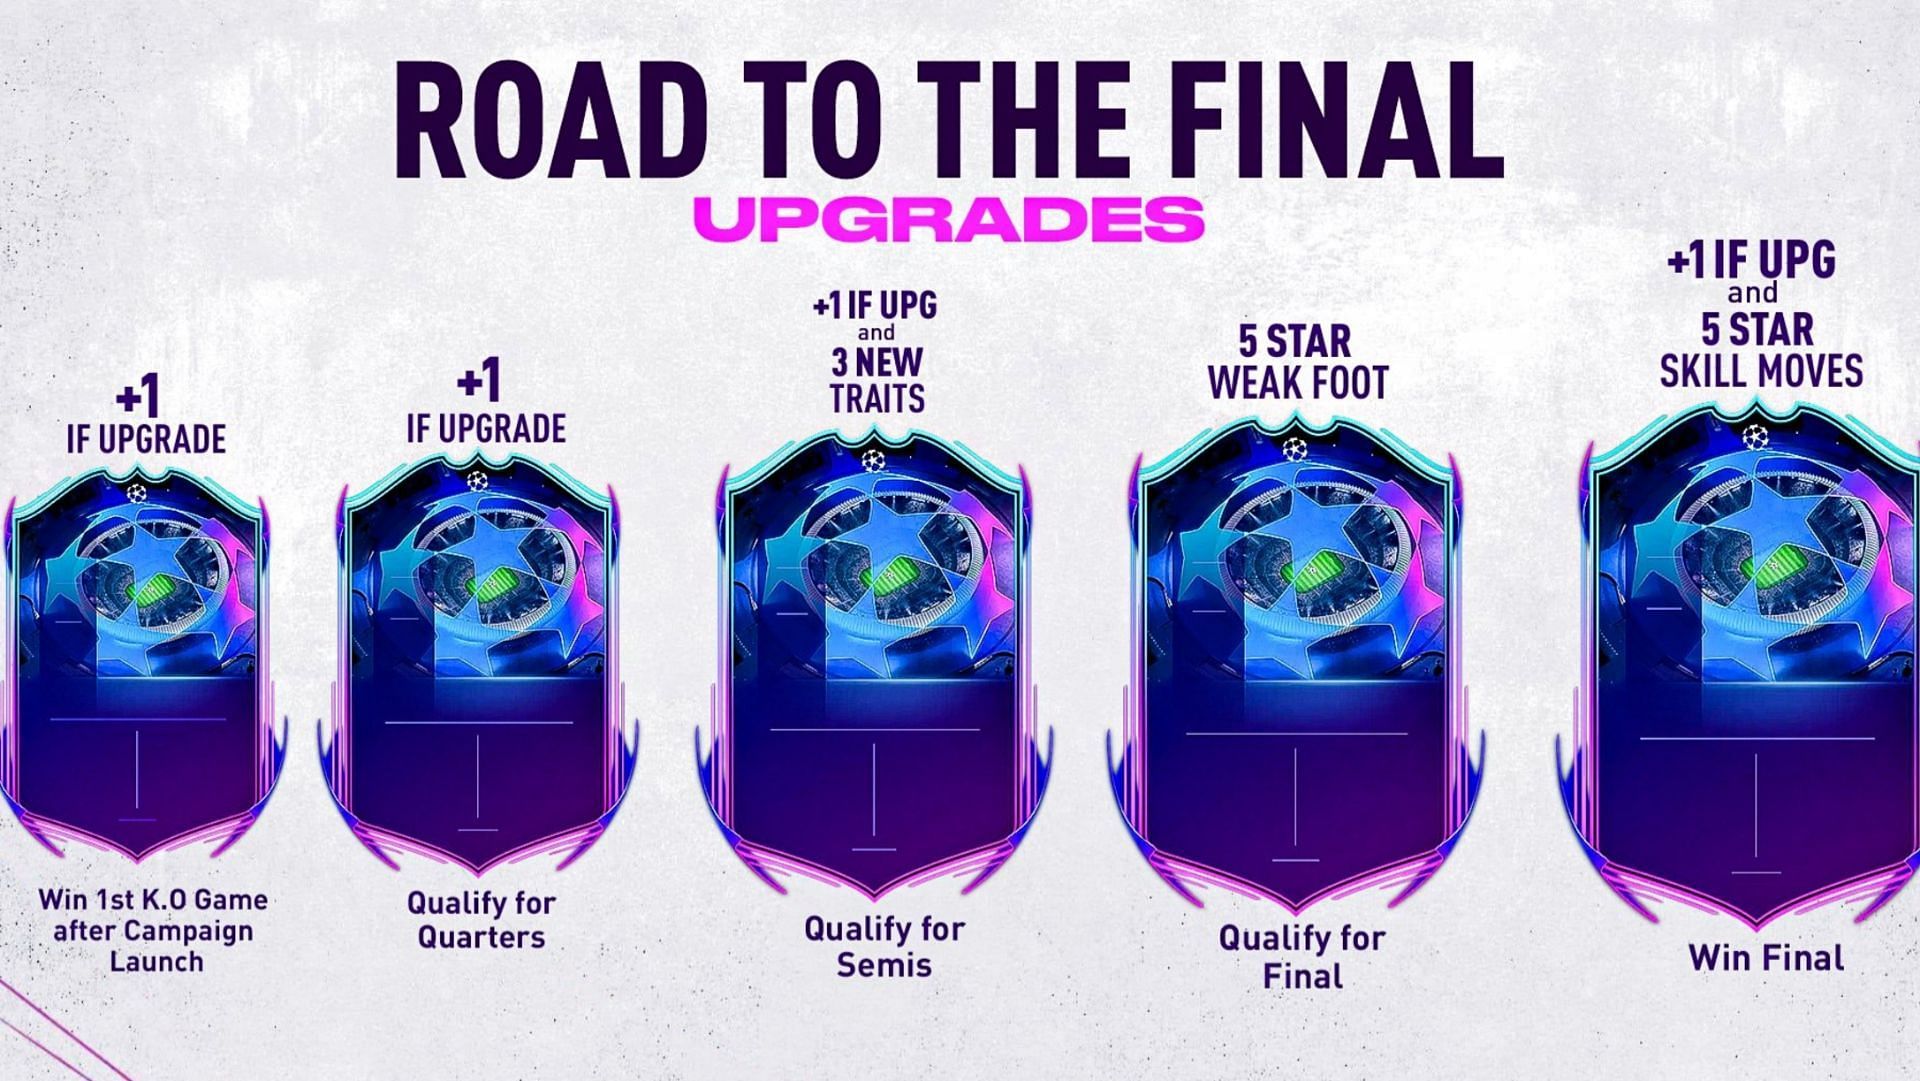 FIFA 23 players could make some interesting investments on the Road to the Final items (Image via Twitter/FUT Sheriff)